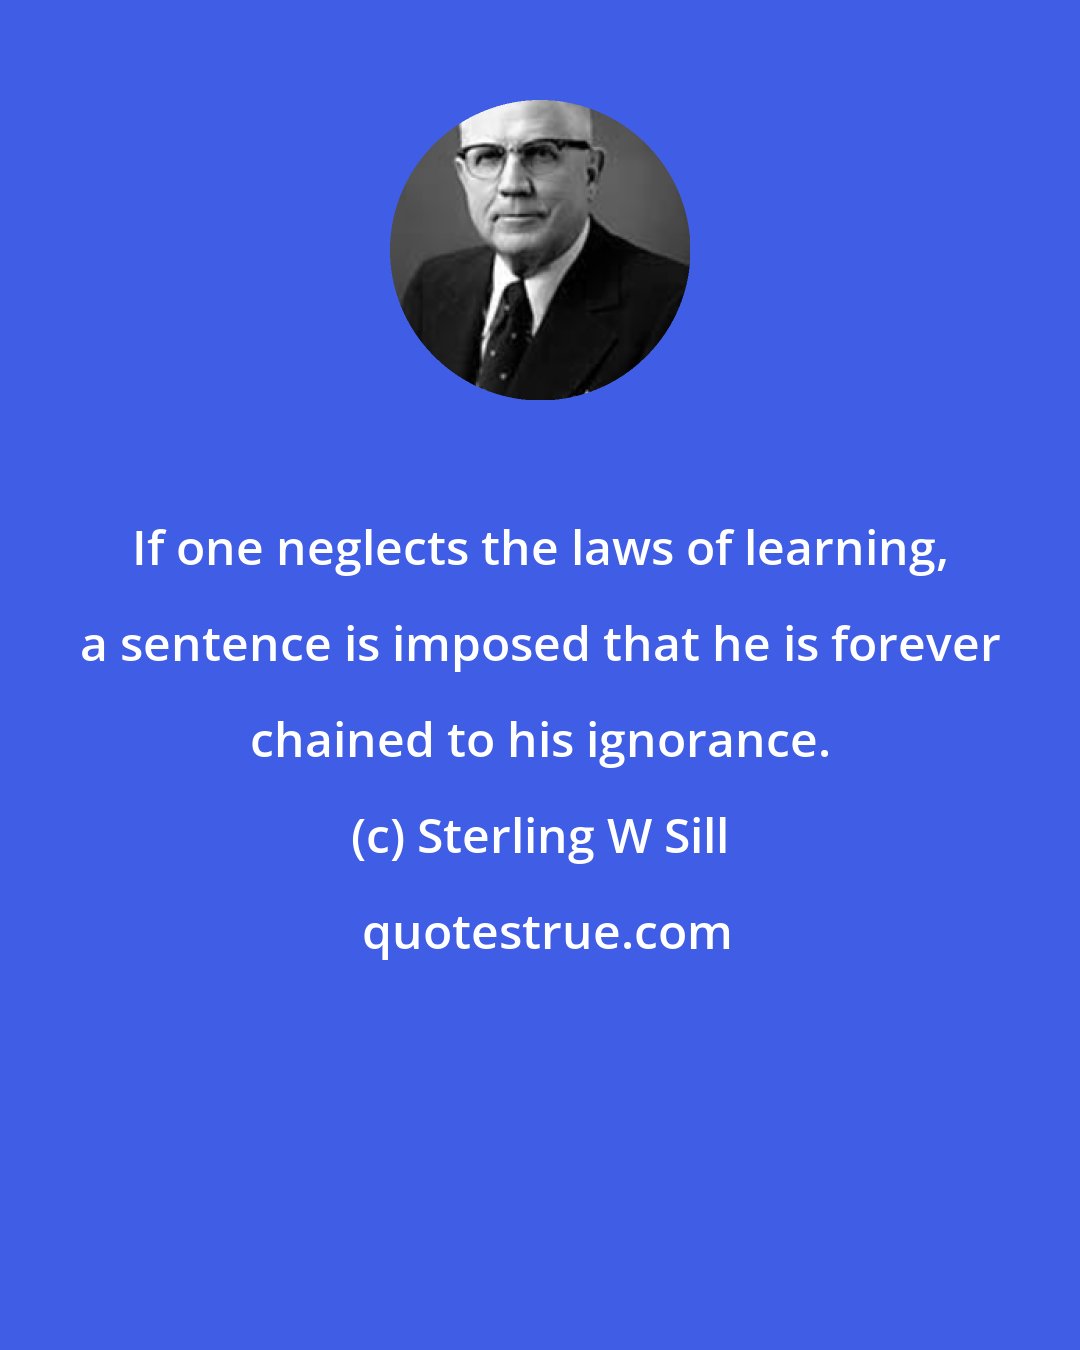 Sterling W Sill: If one neglects the laws of learning, a sentence is imposed that he is forever chained to his ignorance.